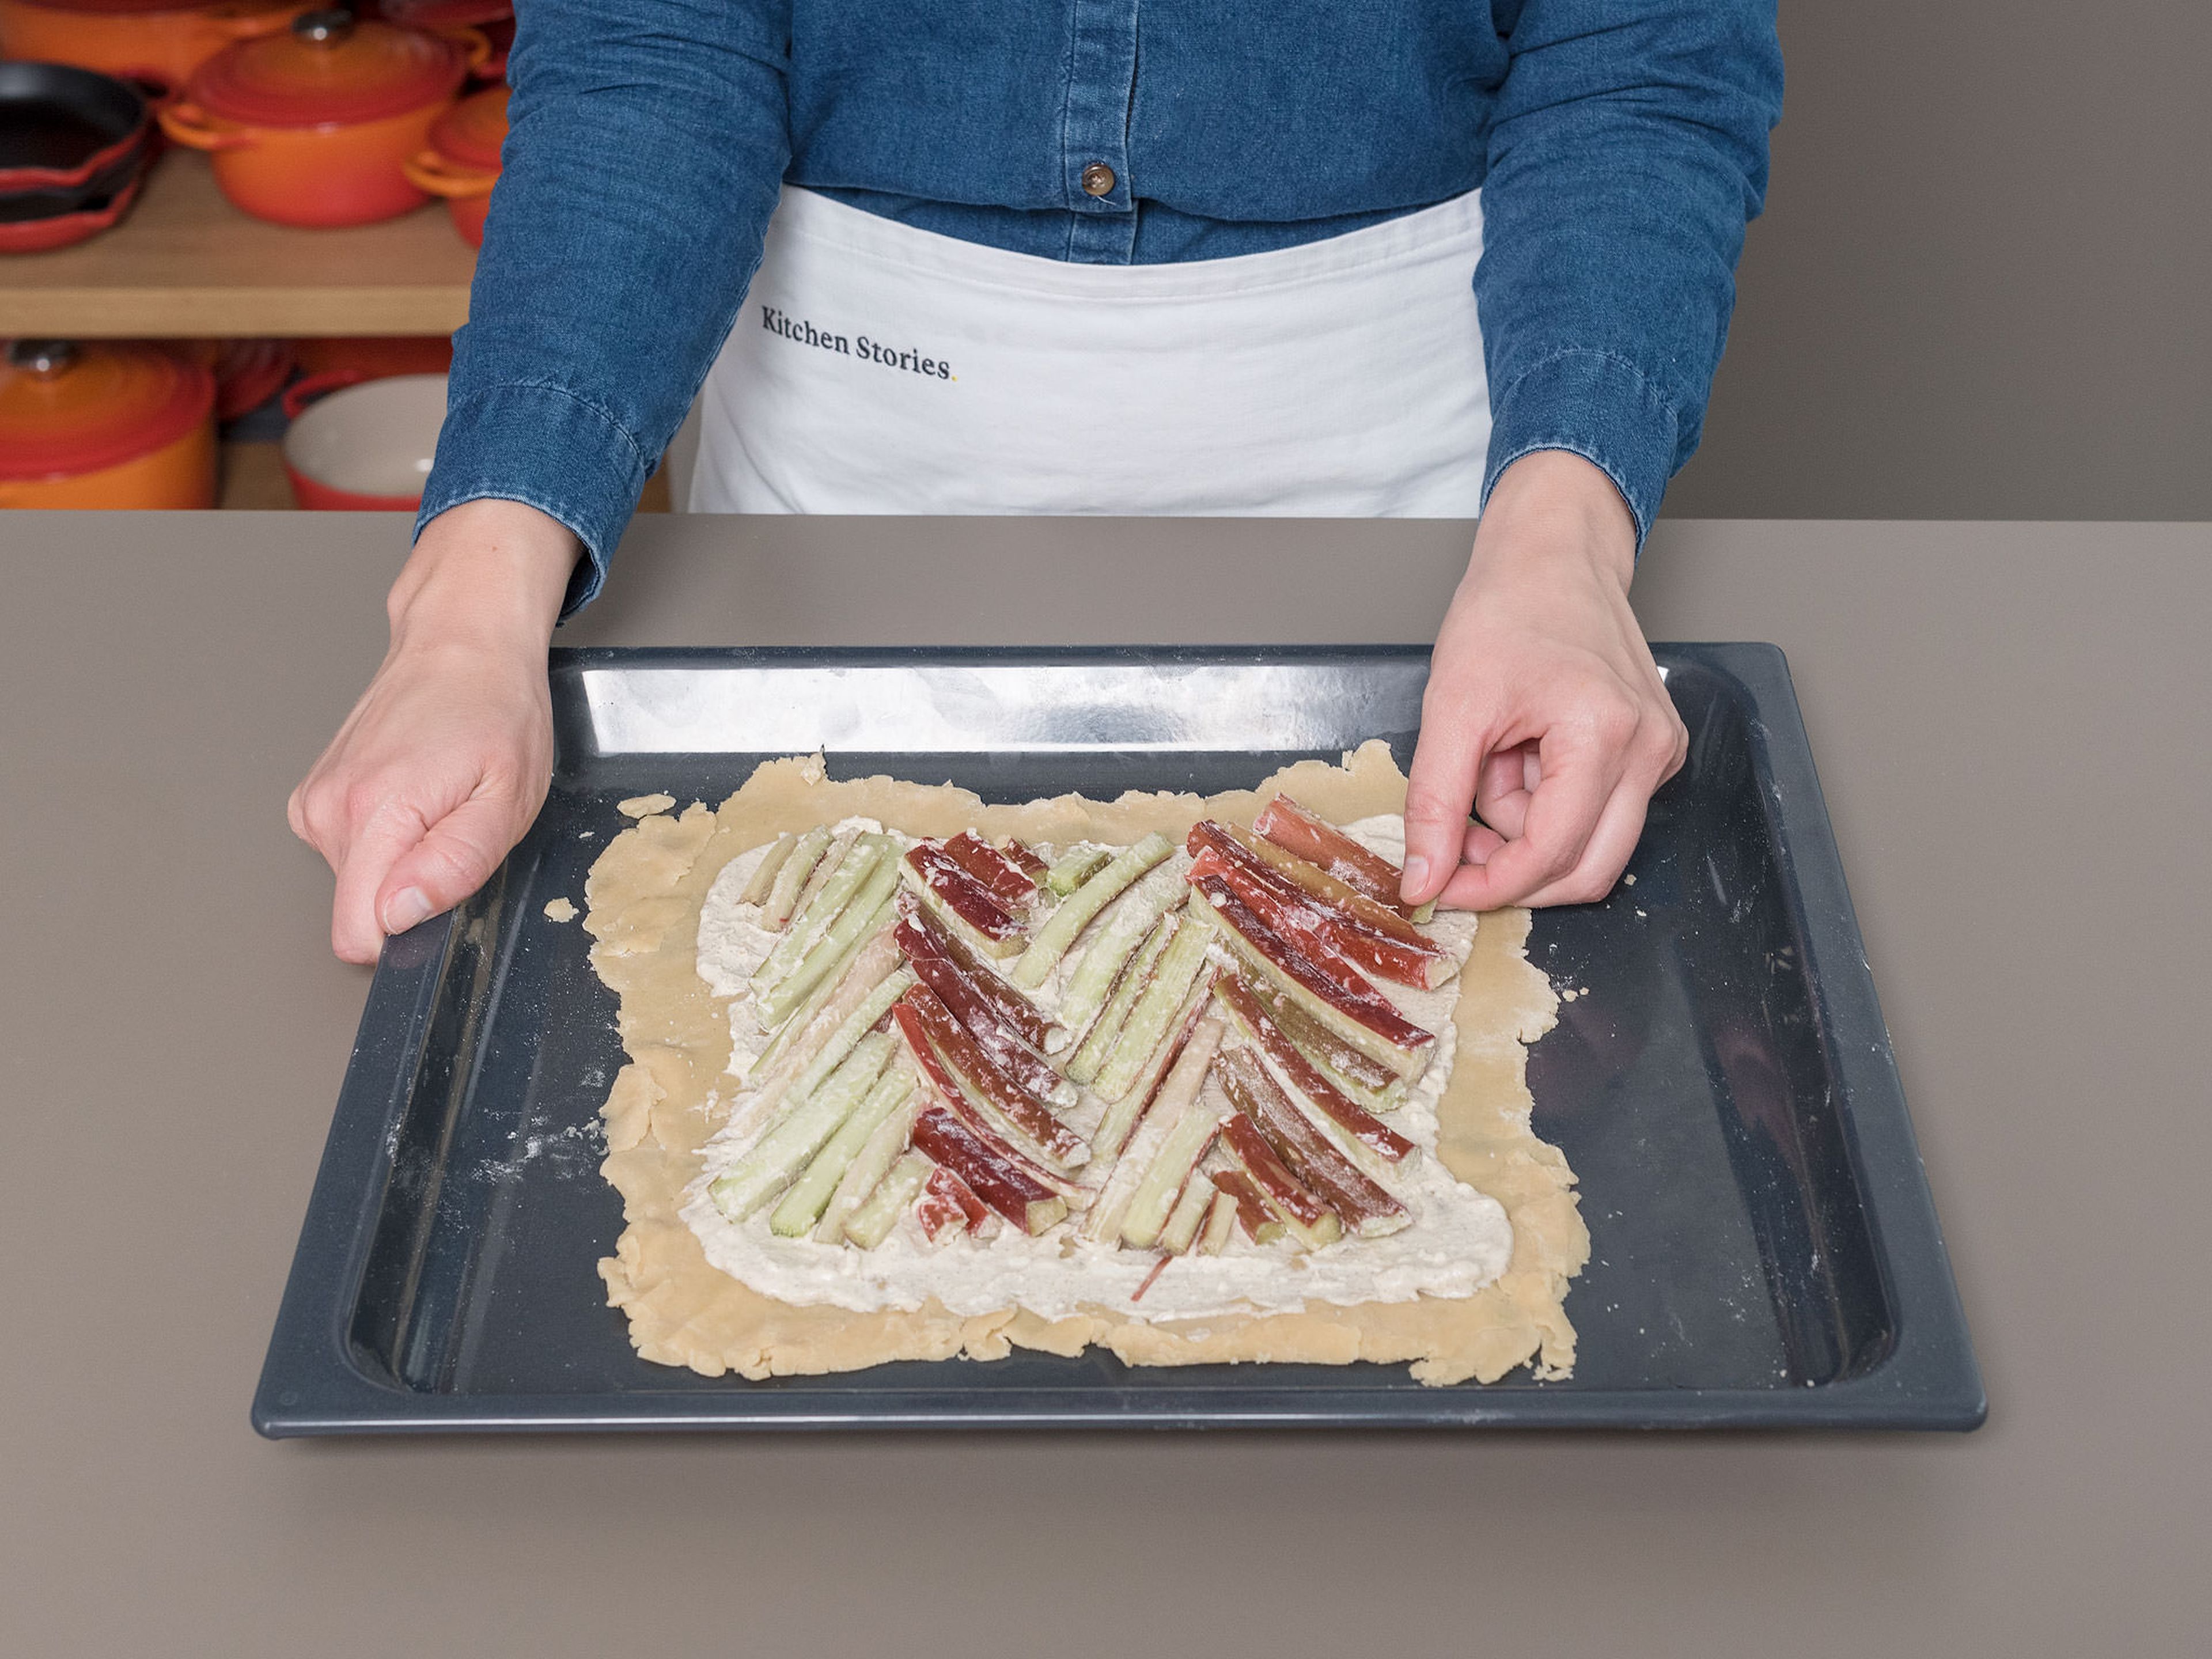 Arrange the rhubarb in a chevron pattern over the mascarpone cheese filling; cut the rhubarb as necessary to fit. Fold the edges of the dough over the rhubarb and crimp. Beat egg yolk into a bowl and brush the dough with it.